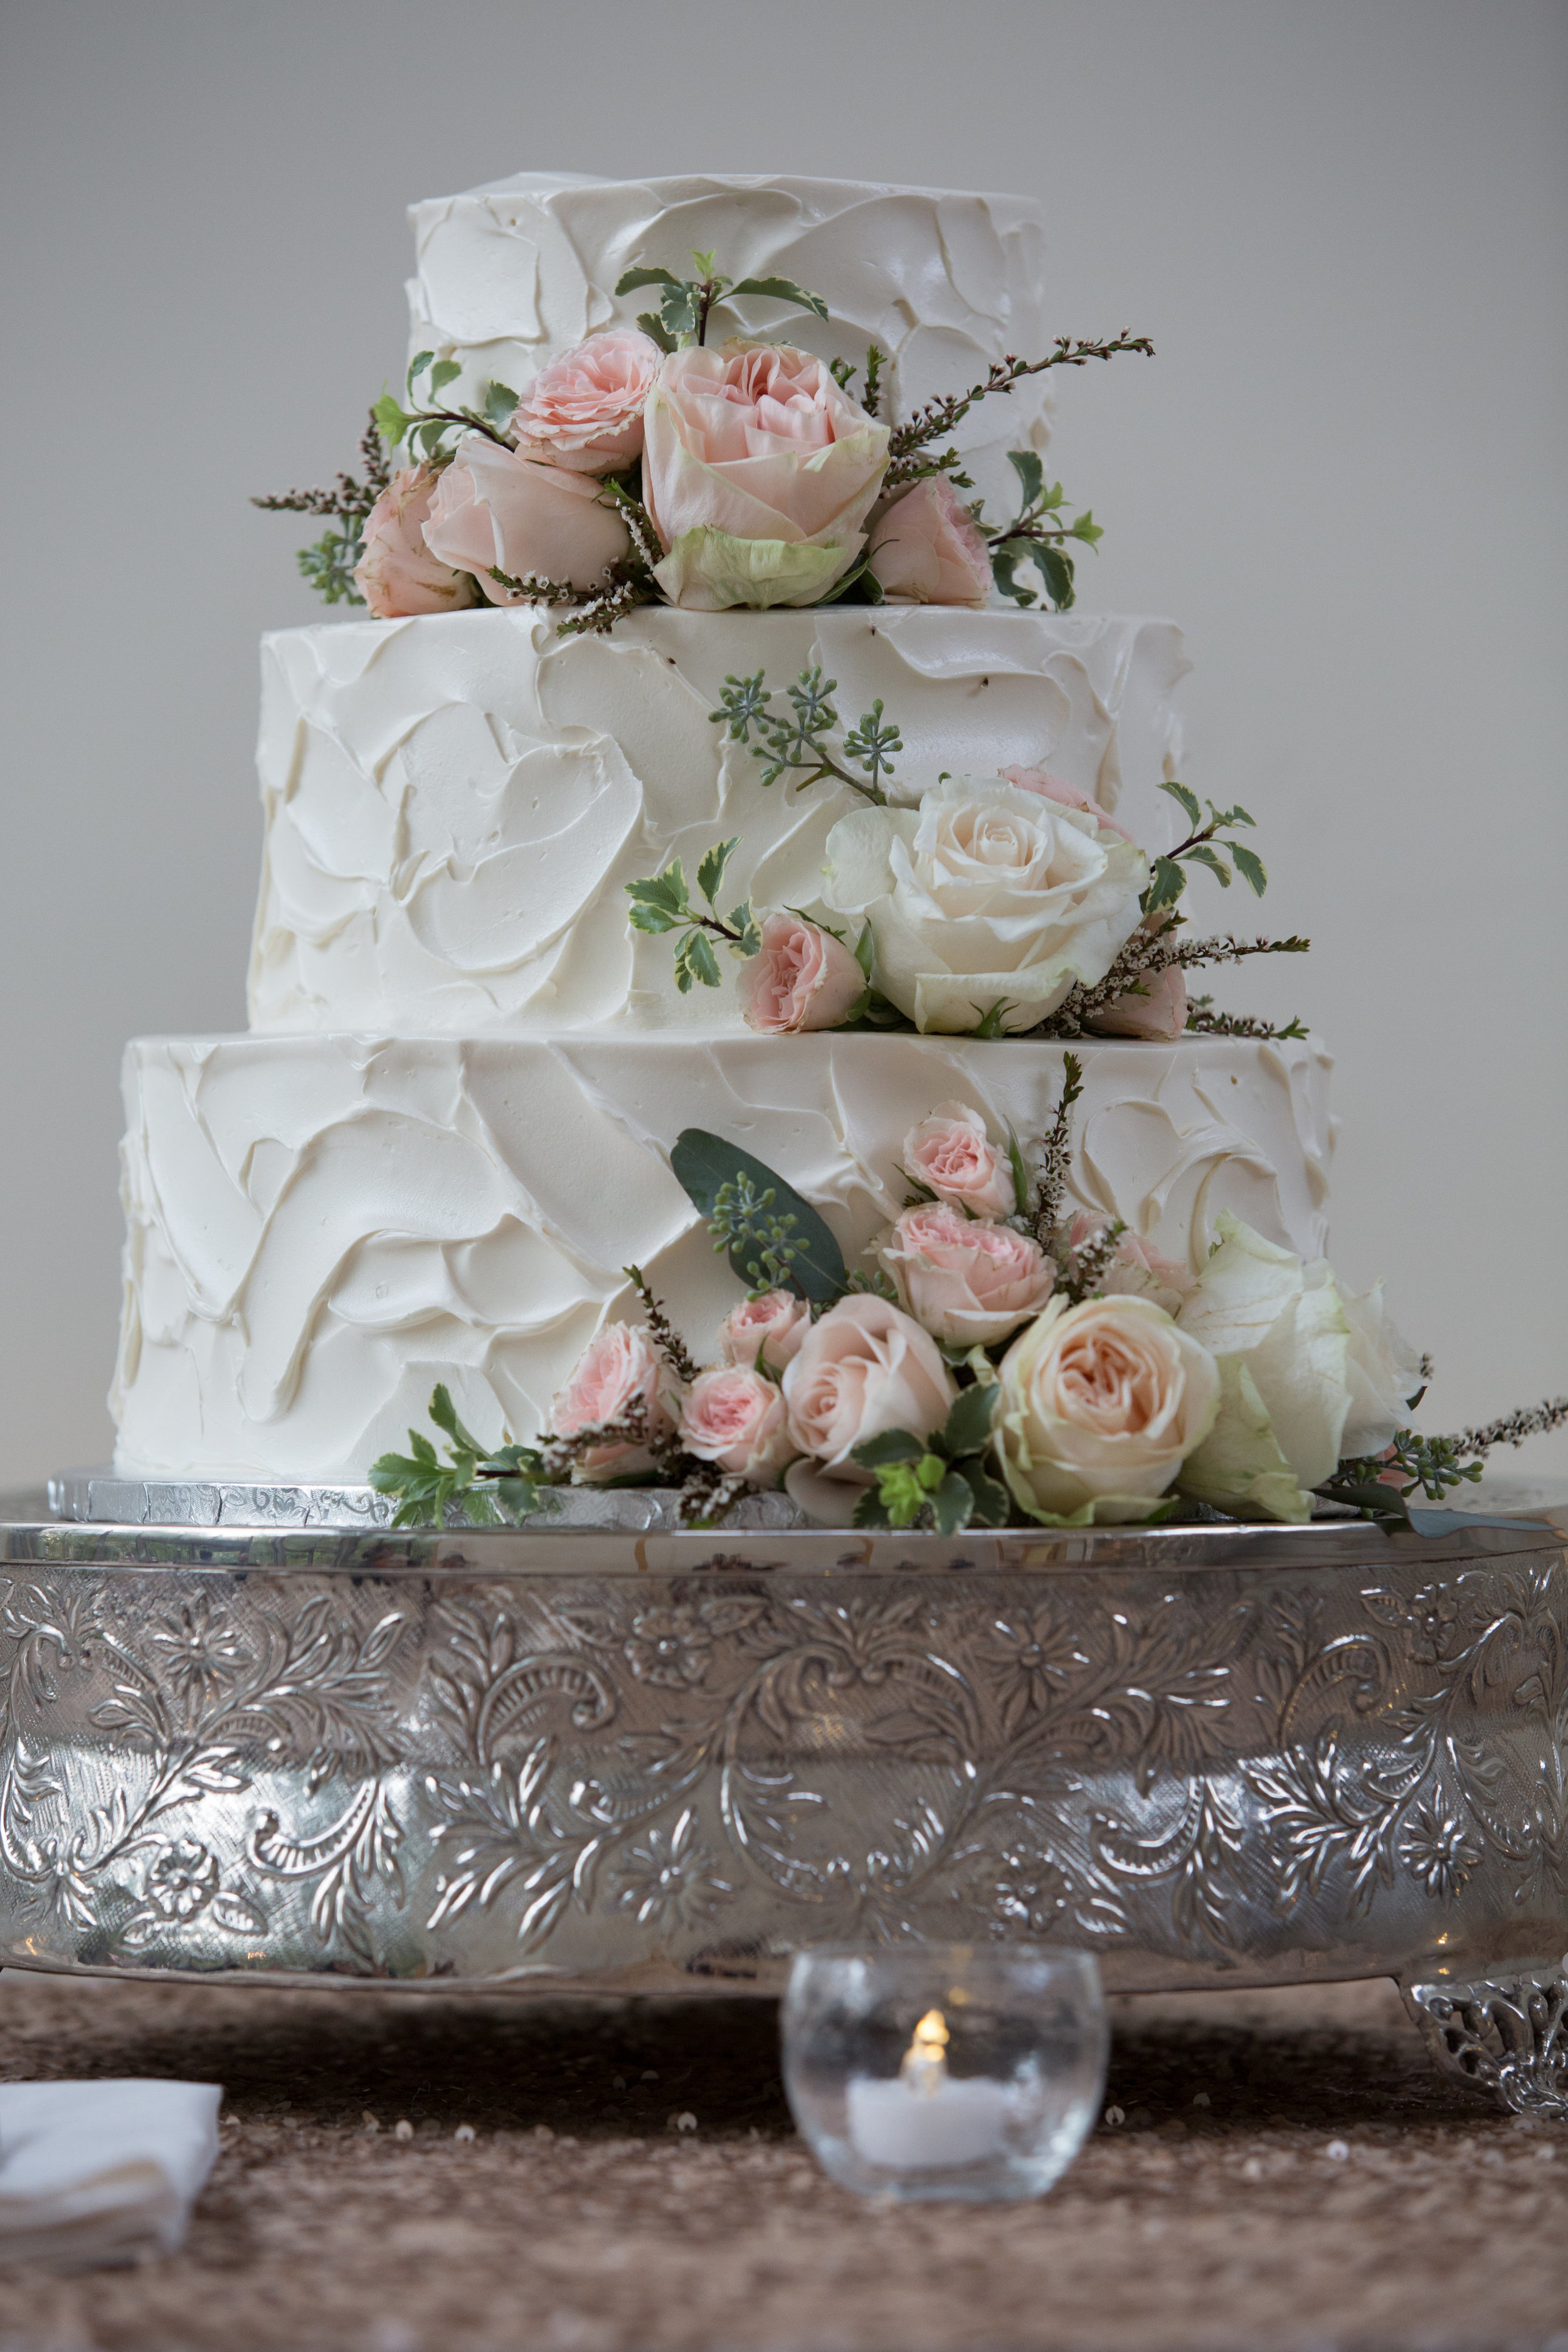 Wedding cake with garden roses and greenery